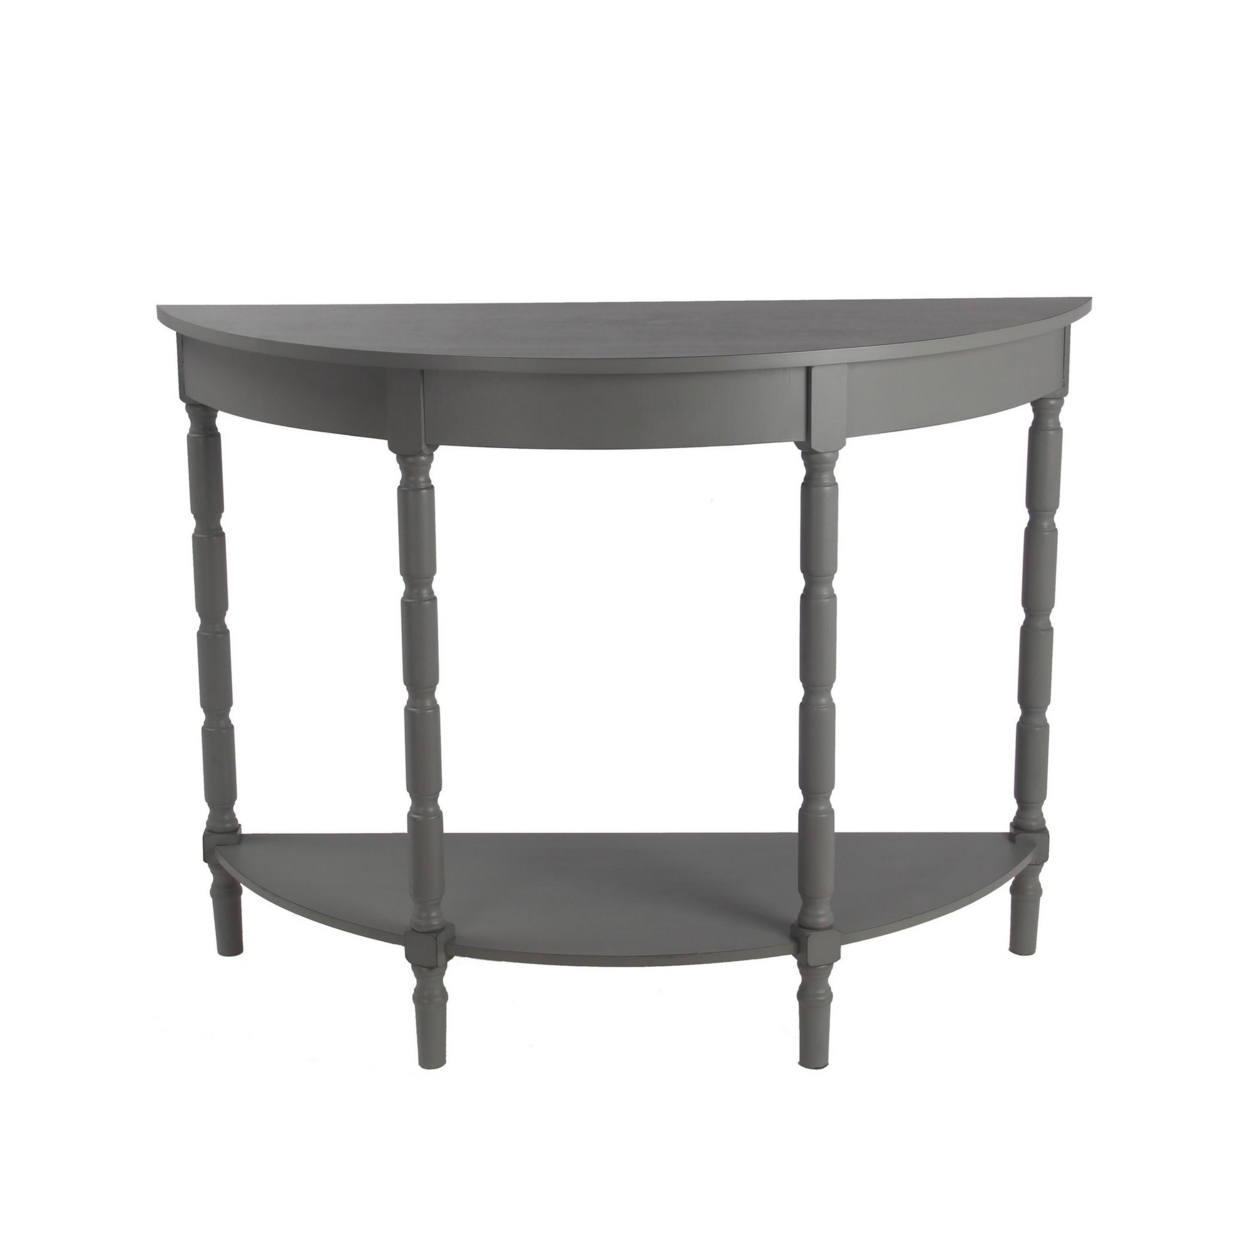 Half Moon Wooden Console Table With Open Shelf And Turned Legs, Light Gray- Saltoro Sherpi